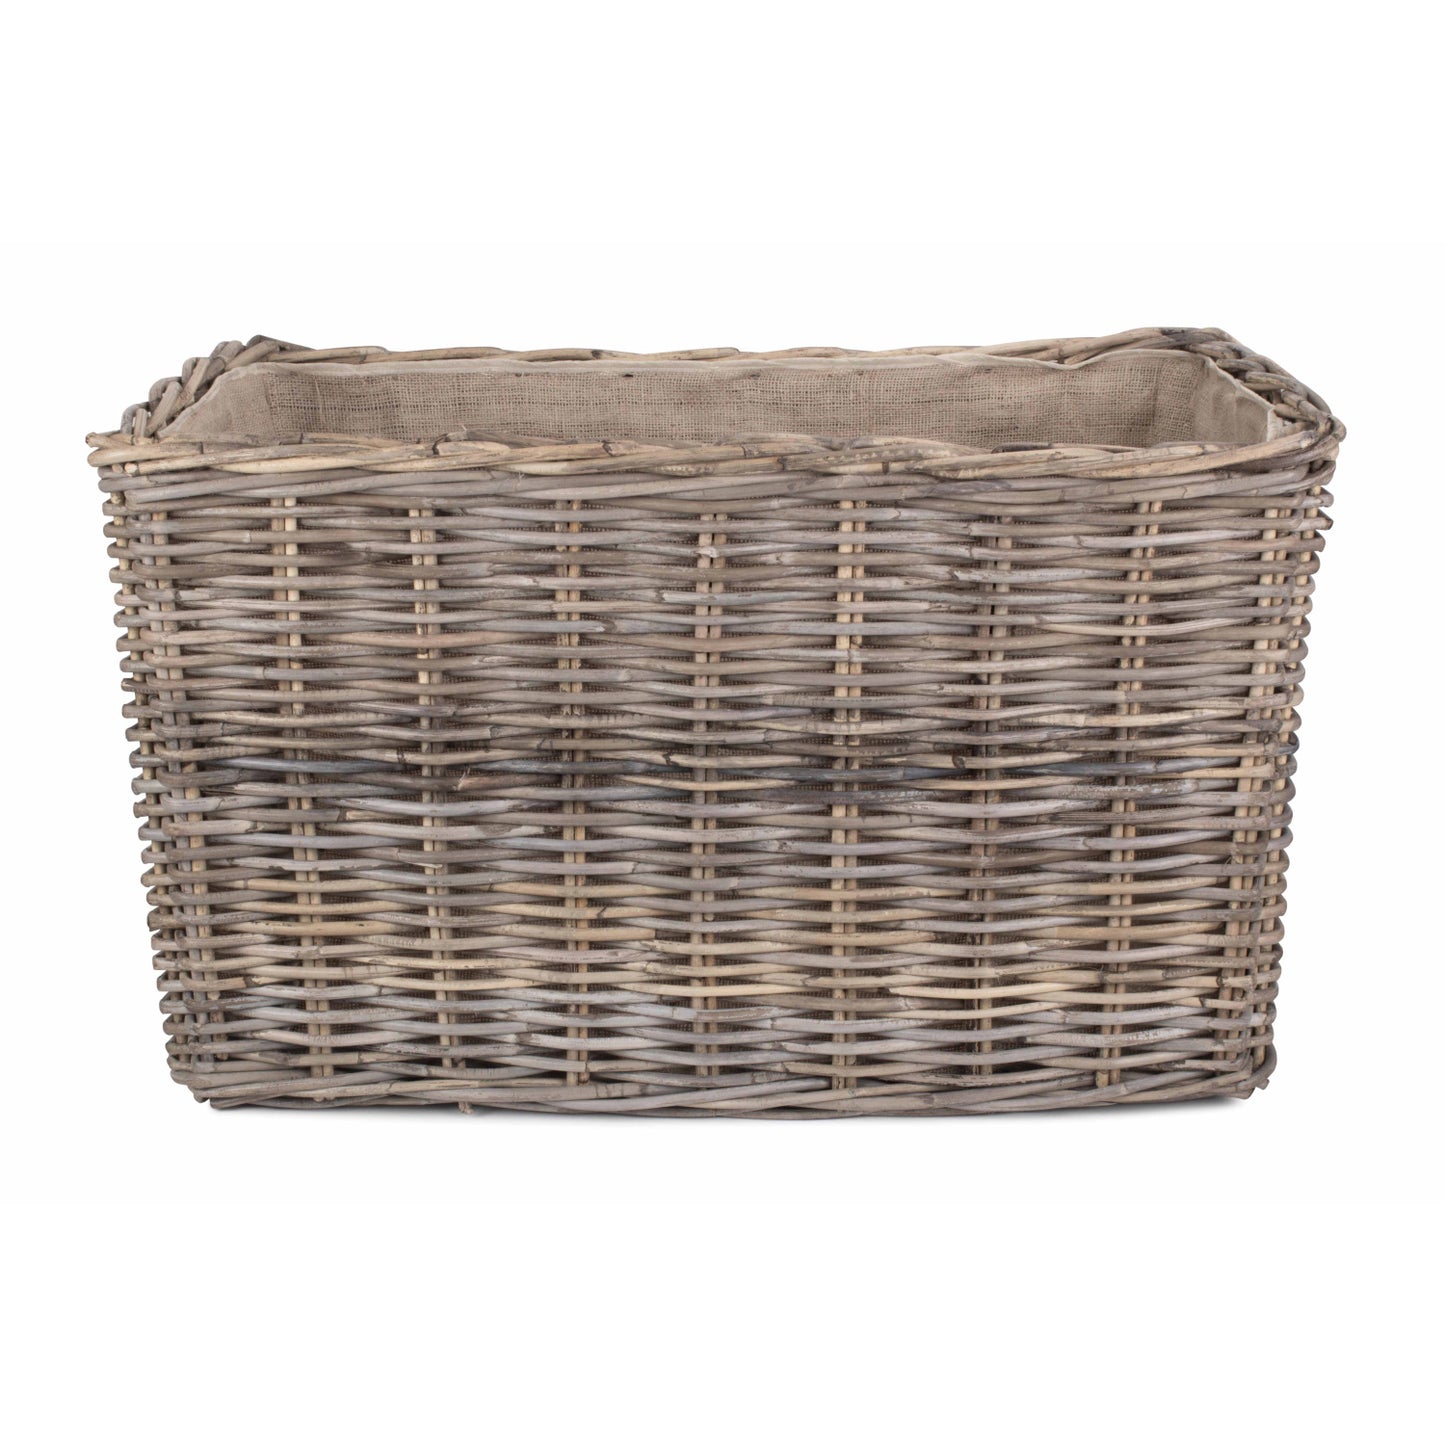 Large Under Bench Basket With Cordura Lining